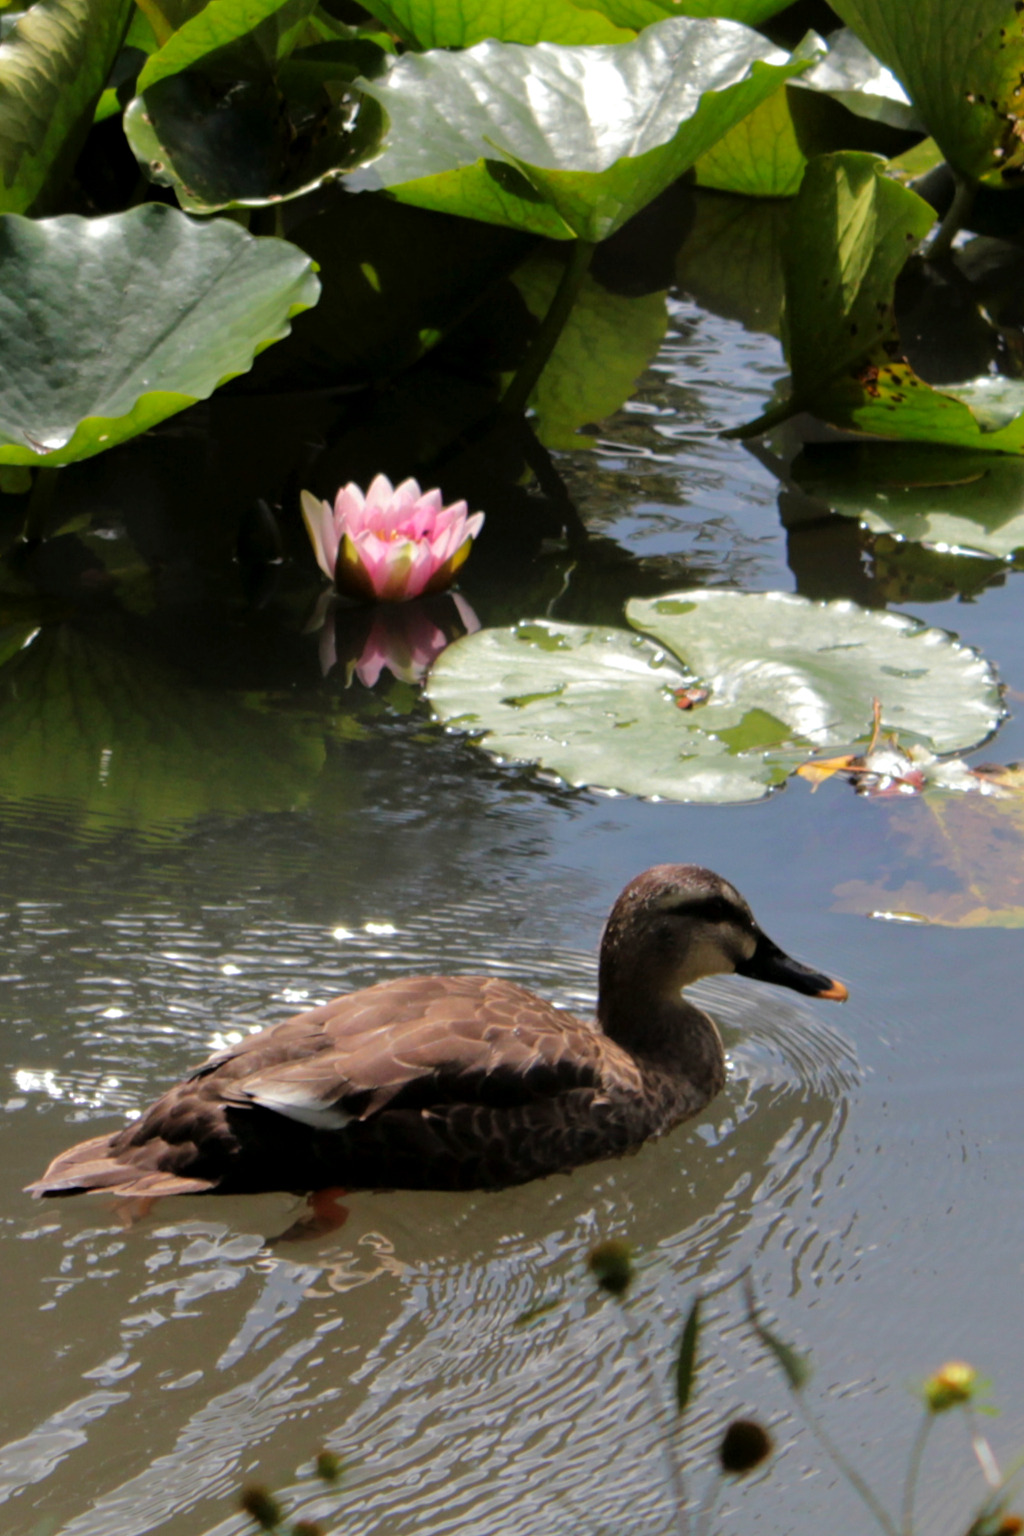 Spot-billed duck and lotus in the pond at Kanazawa Shrine